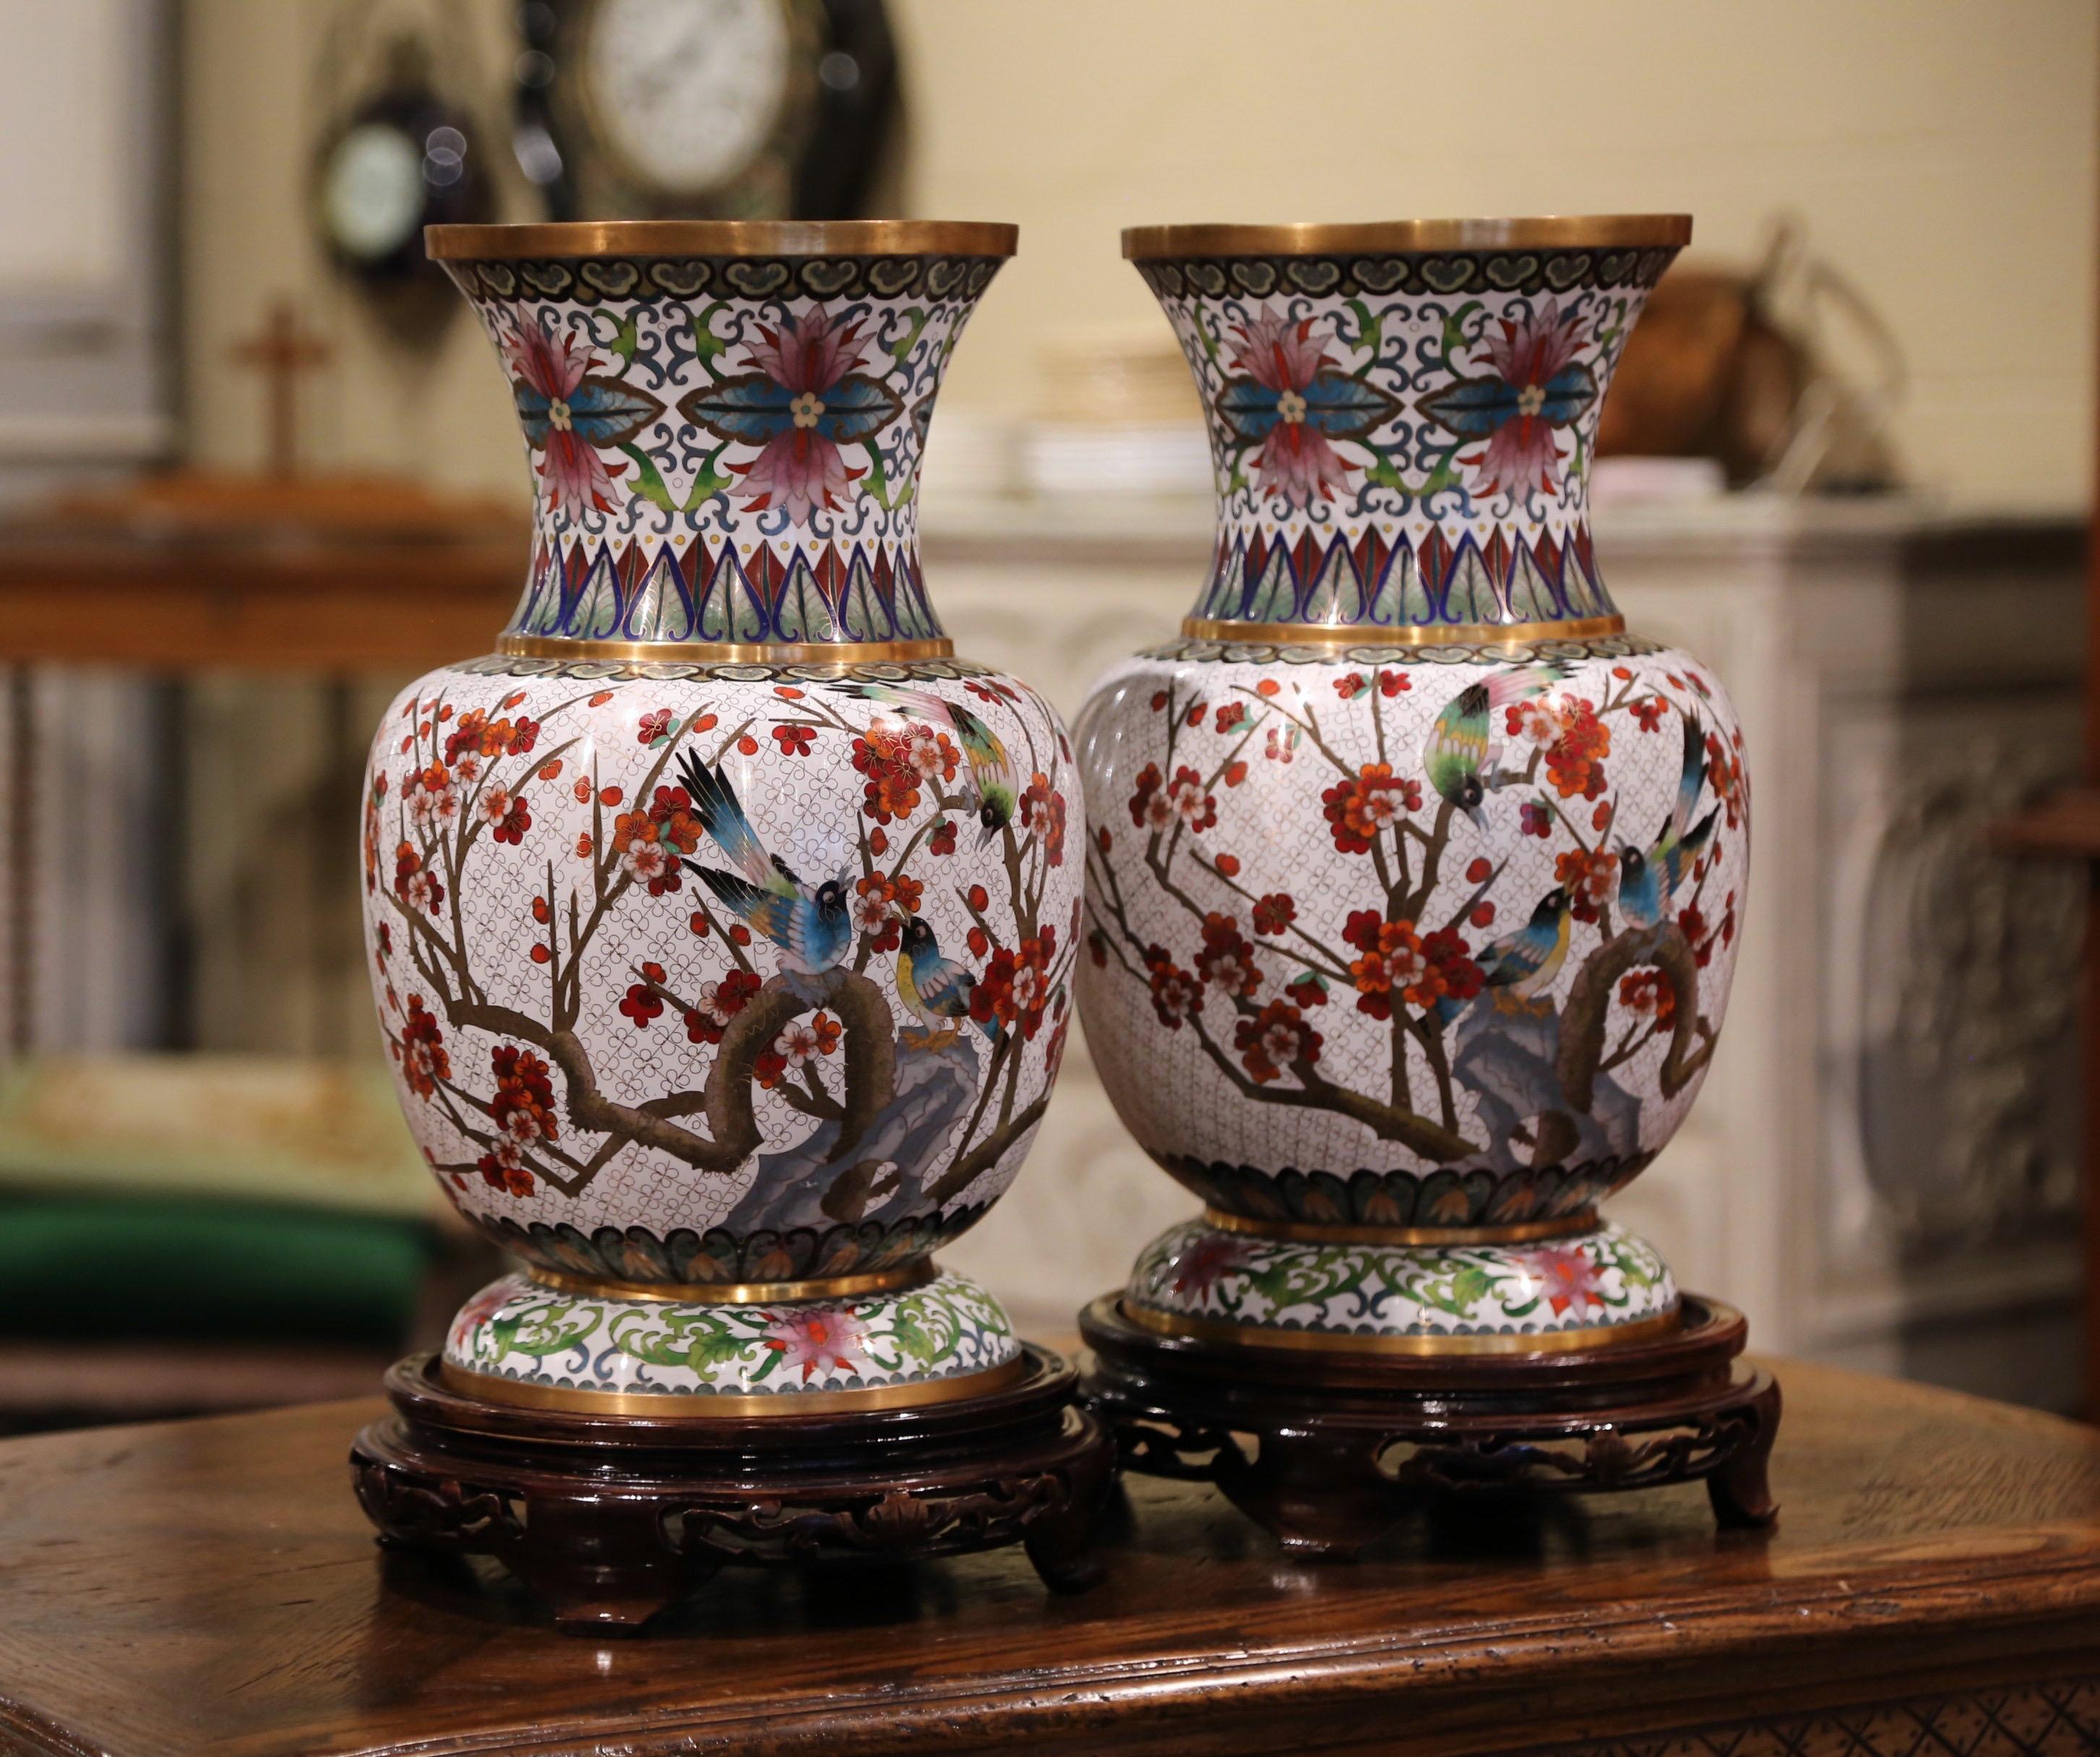 Pair of 20th Century Chinese Cloisonné Enamel Vases on Stand with Bird Decor 3